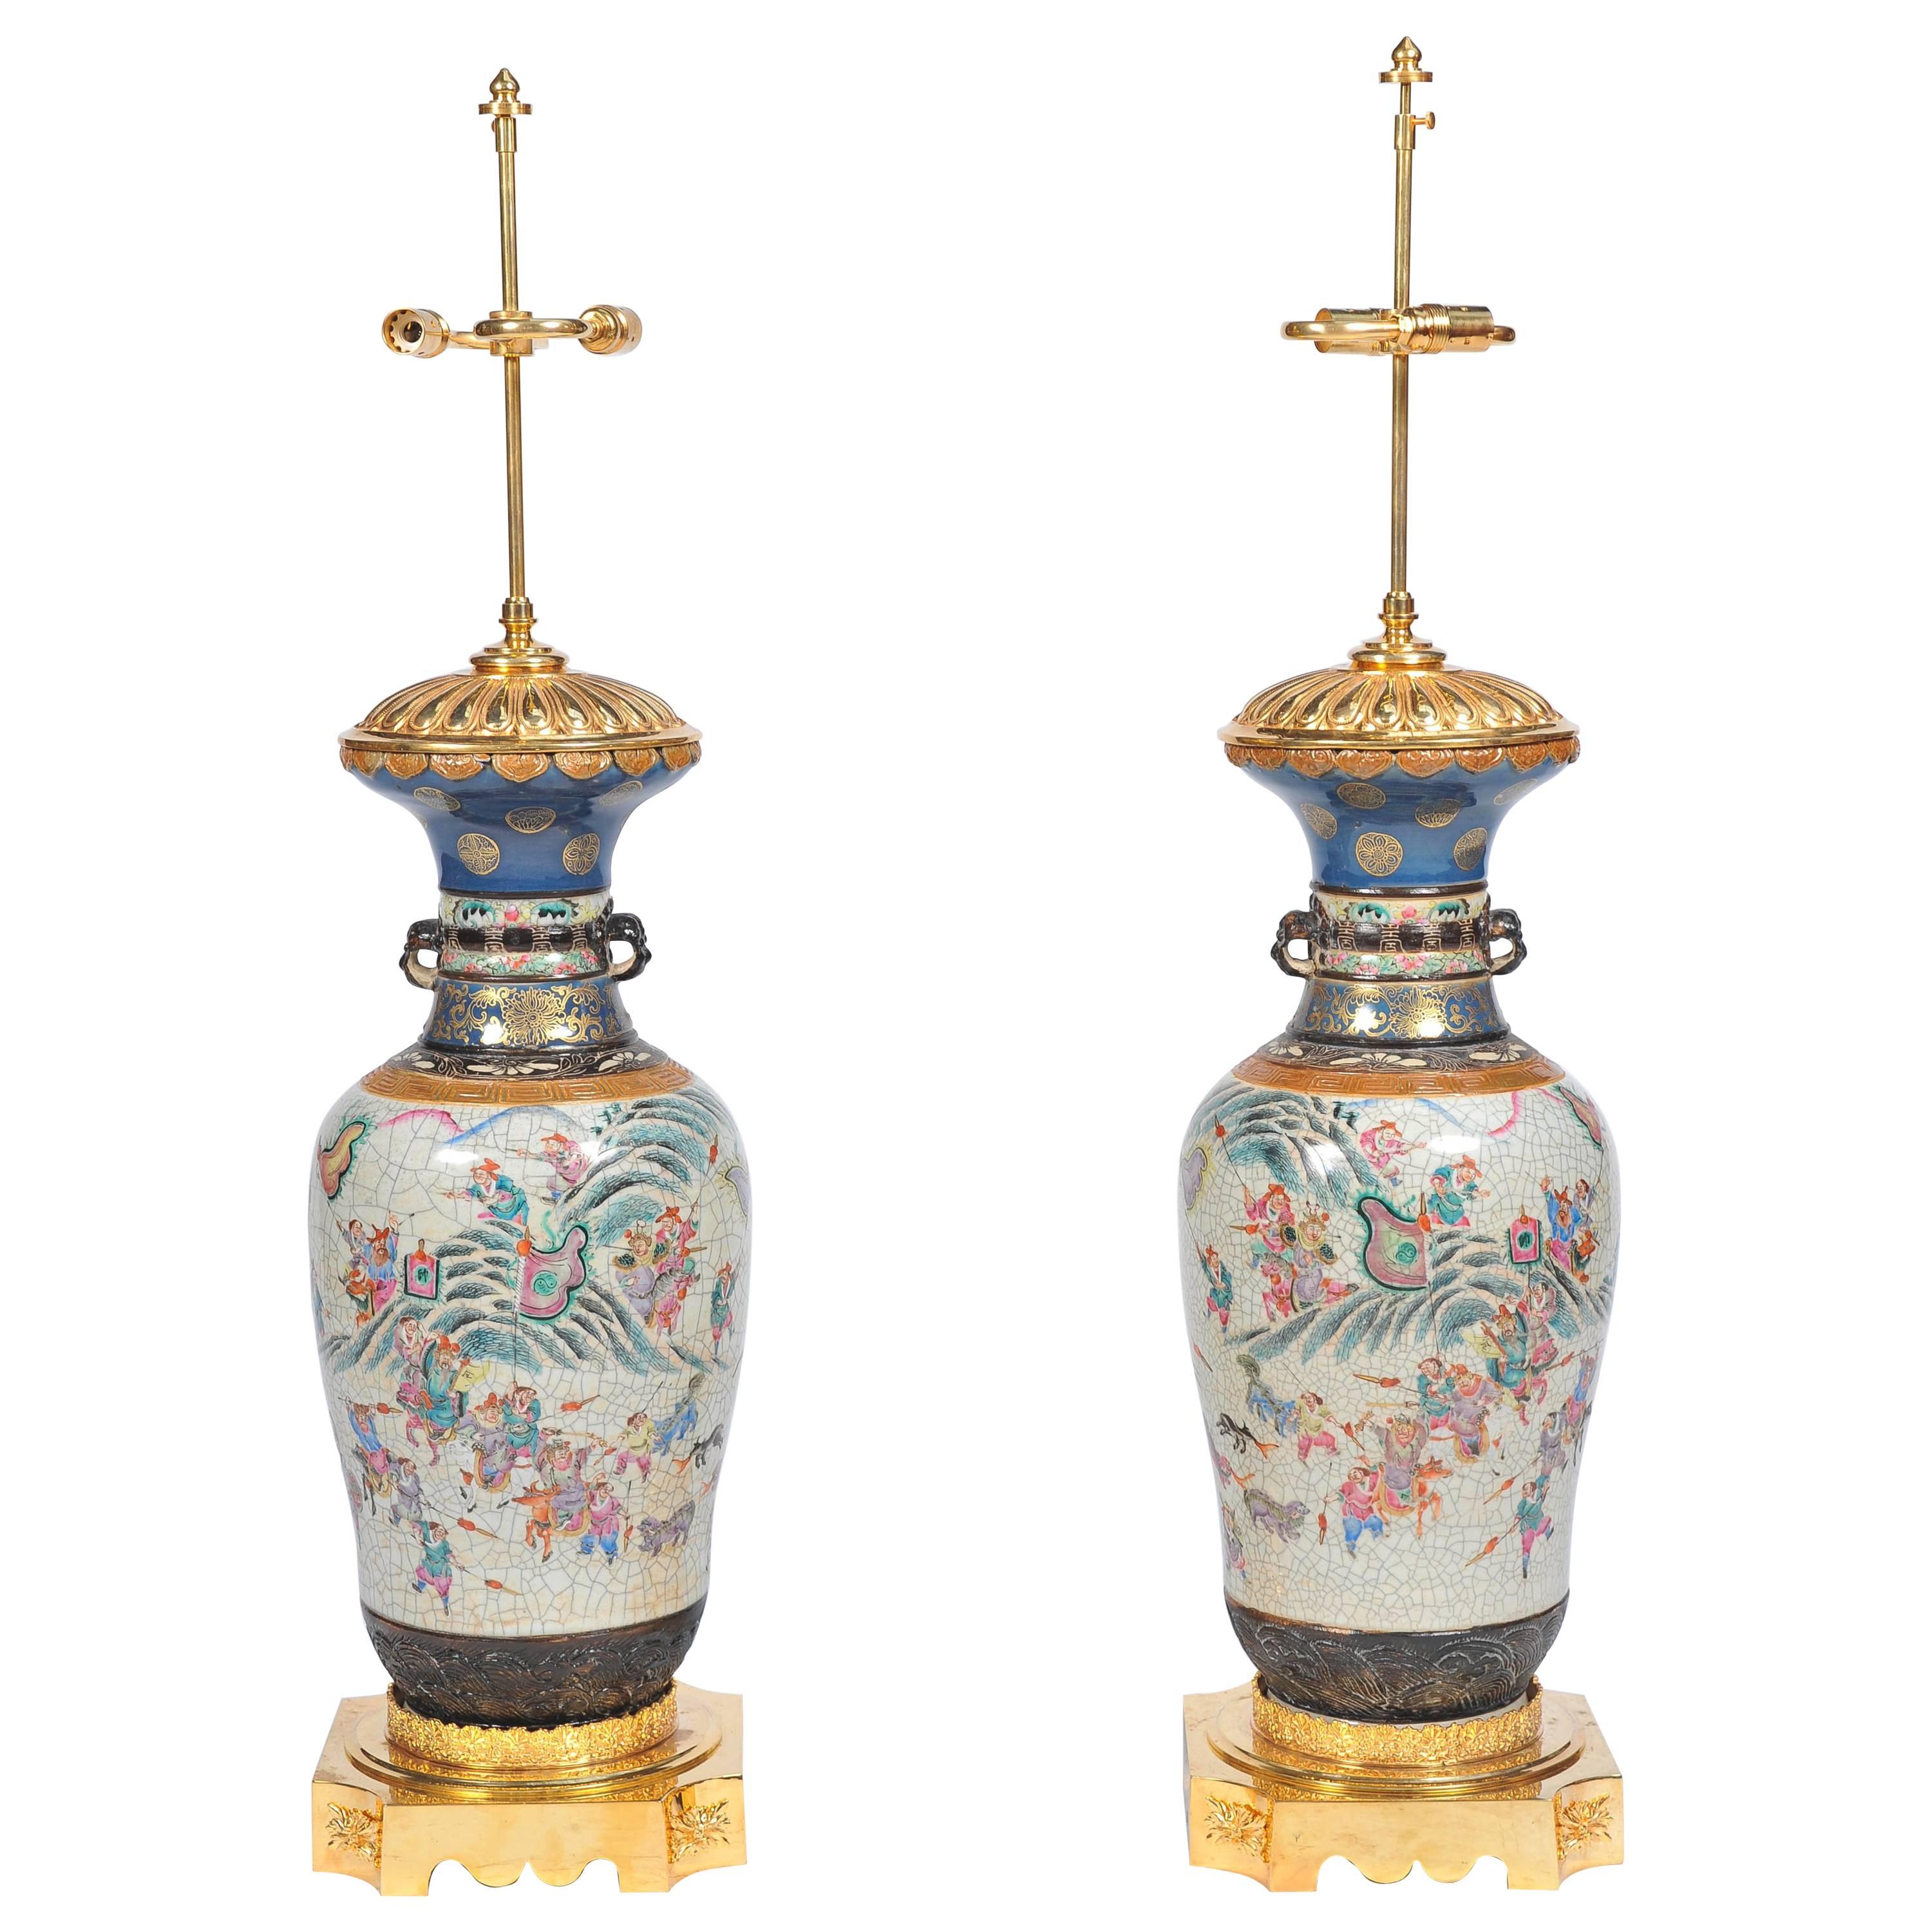 Large Pair of 19th Century Chinese Crackleware Vases or Lamps